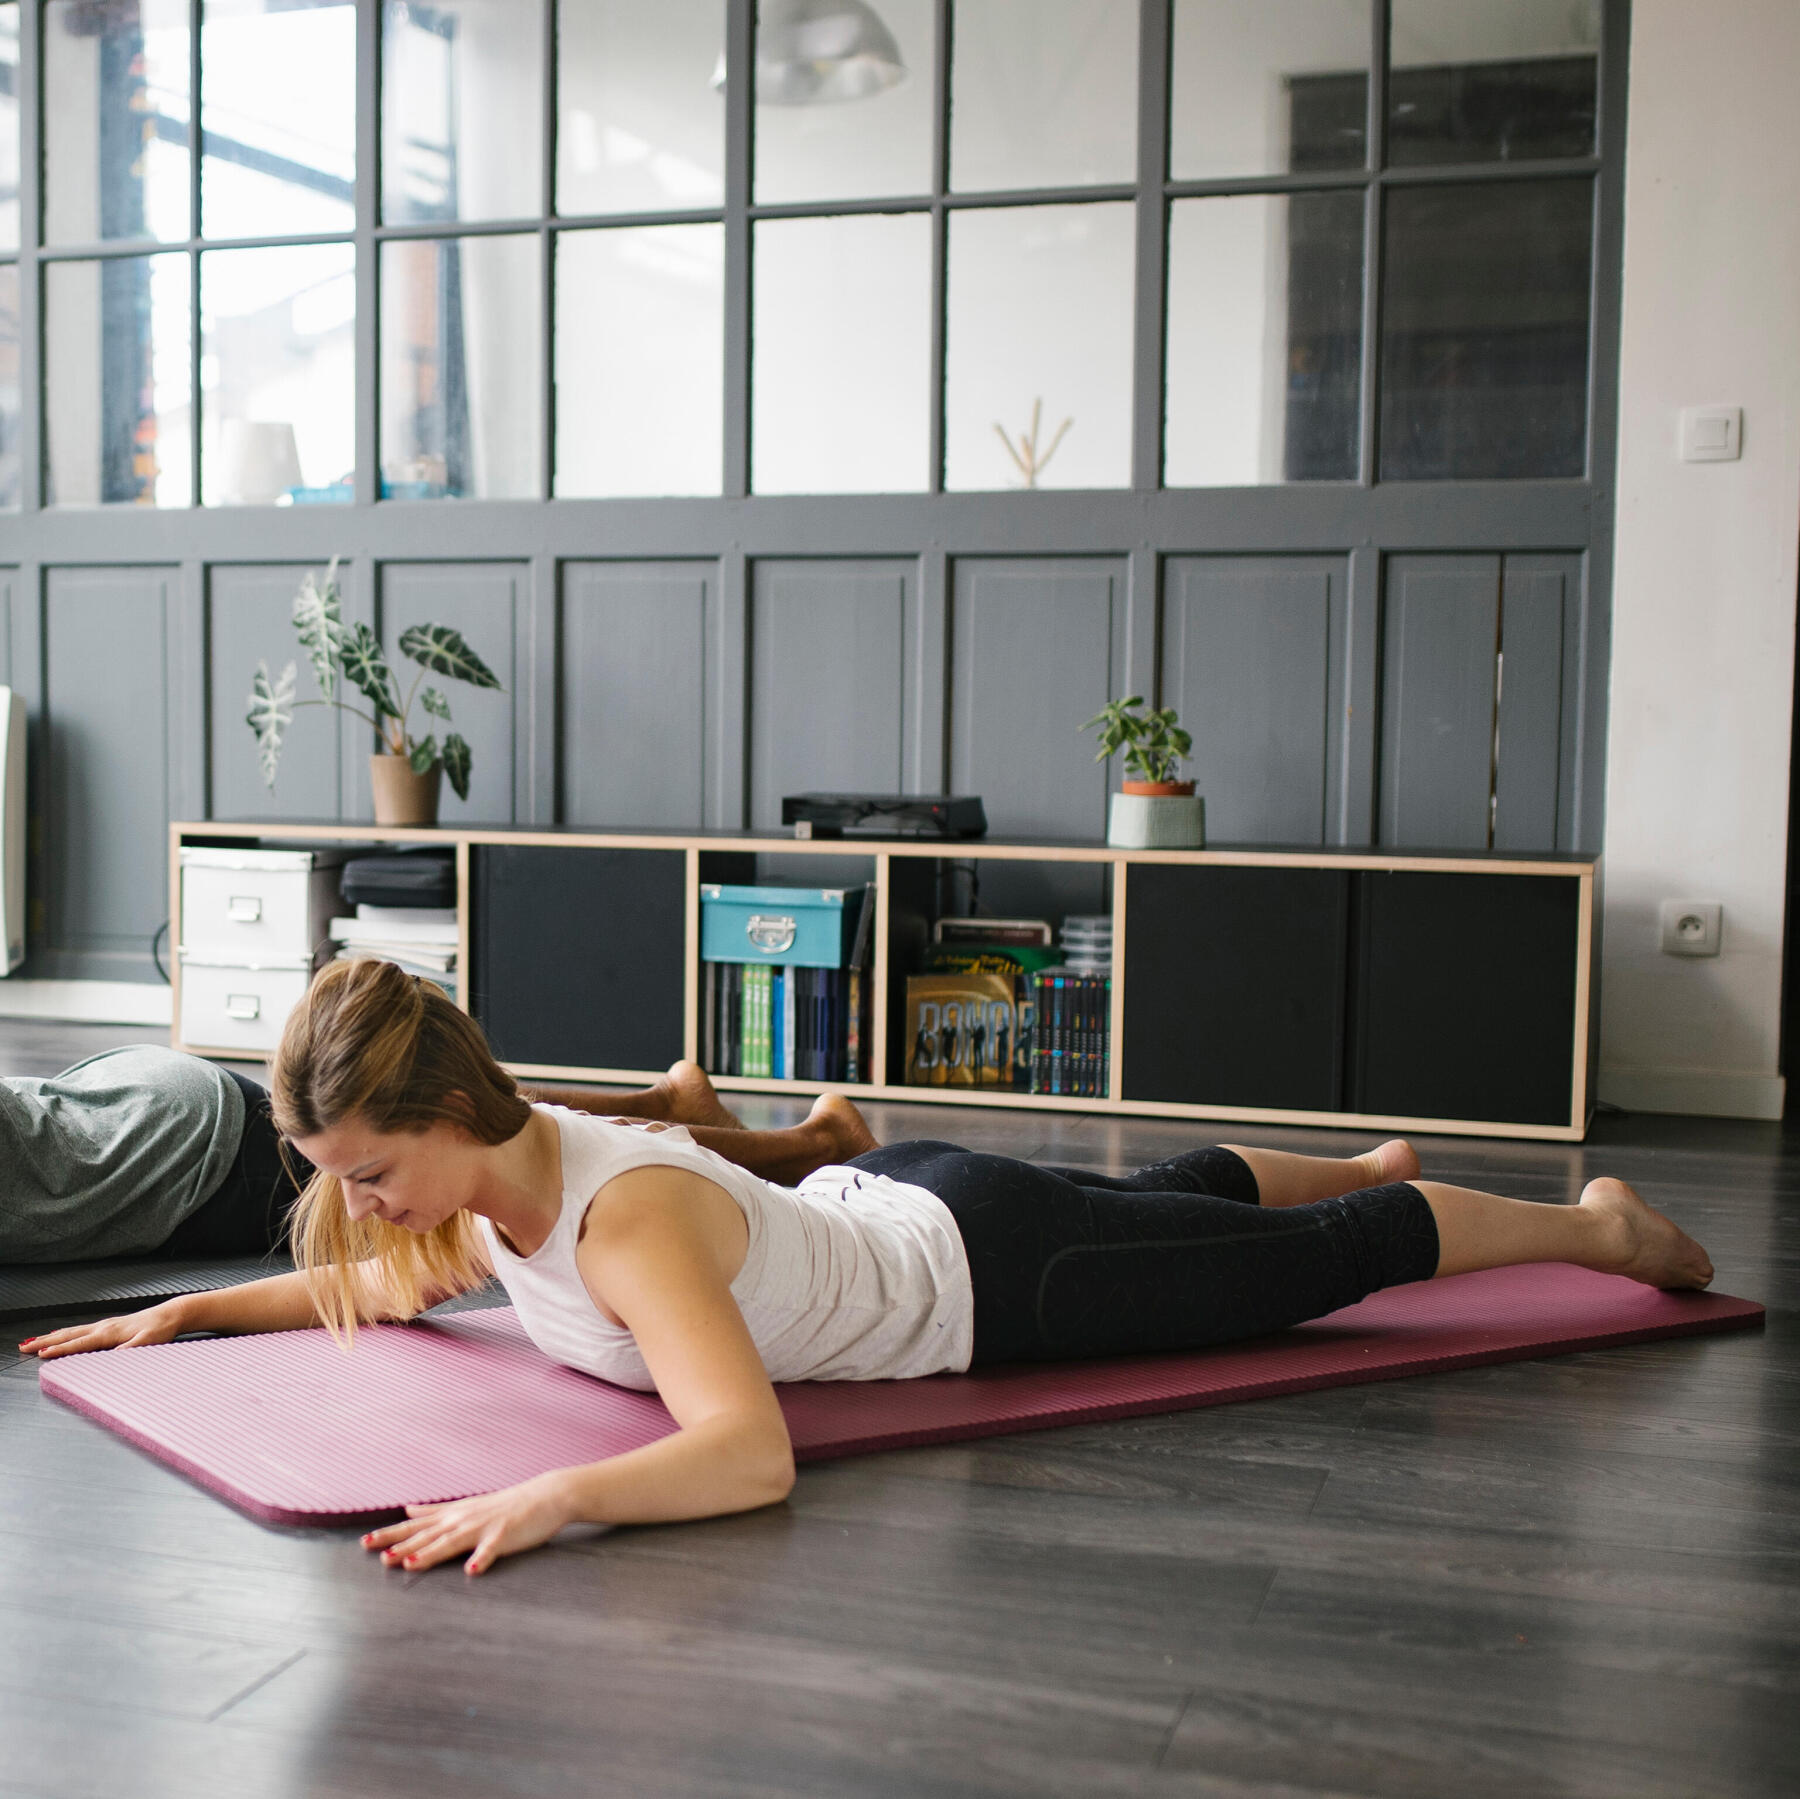 5 Exercises You Can Do With Just a Yoga Mat